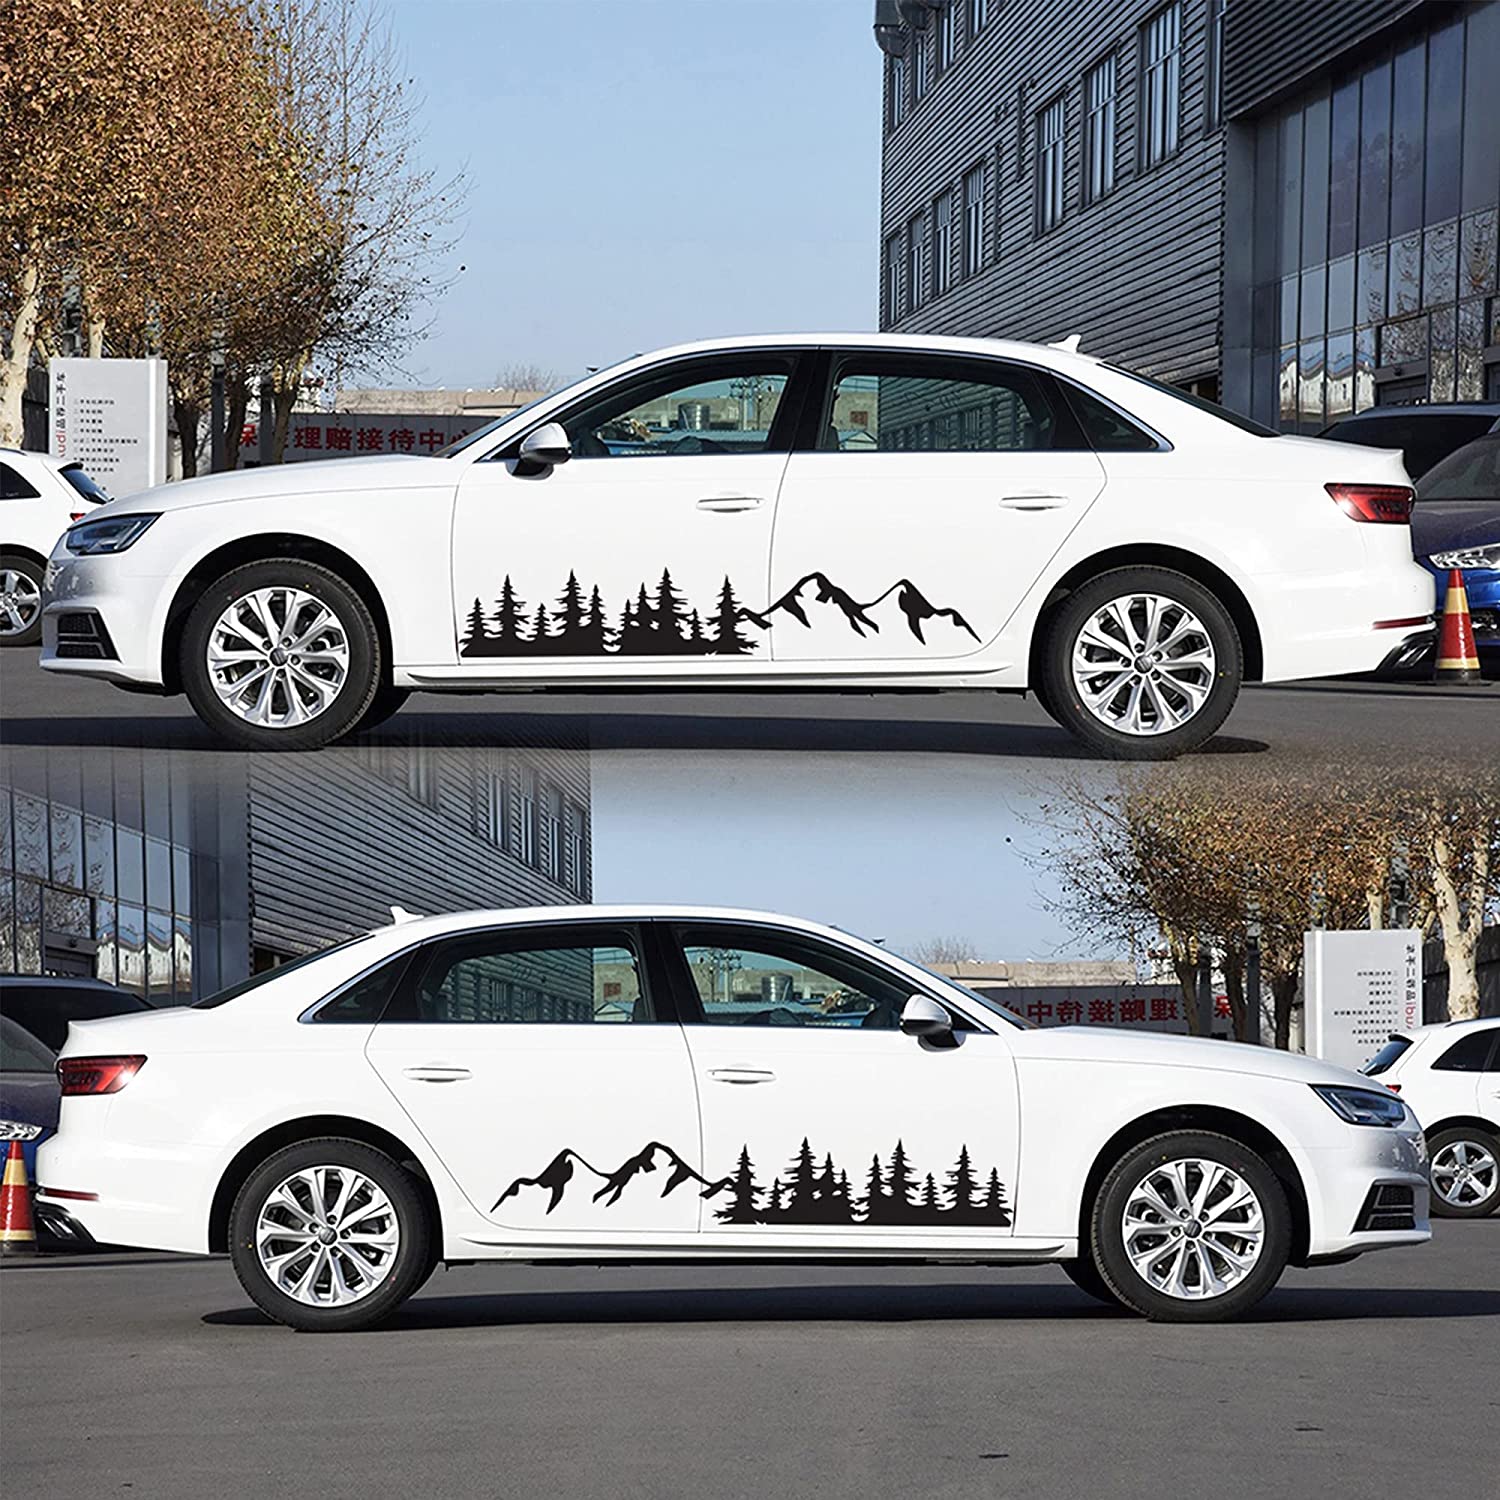 Fochutech Mountain Car Decals Large, Tree Forest Graphics Car Sticker